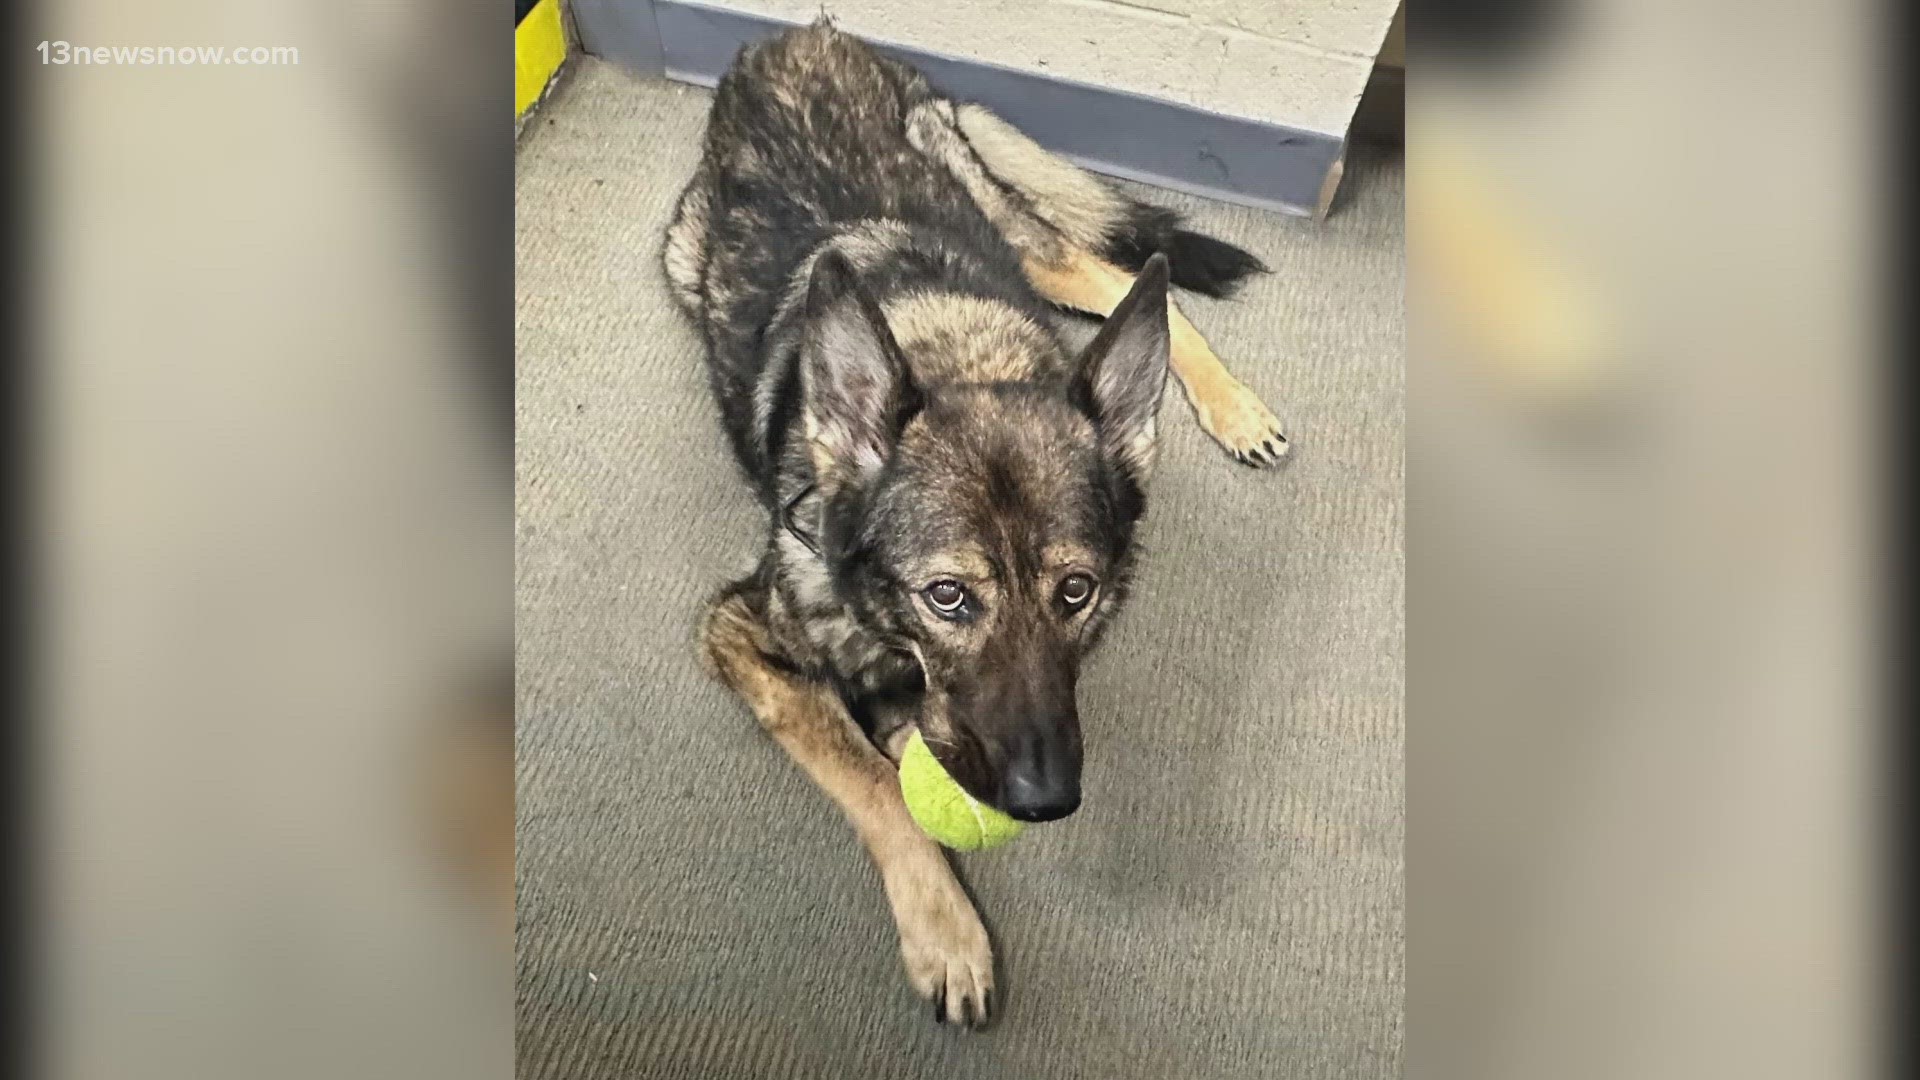 After 10 years on the force, Candy, an 11-year-old German shepherd was diagnosed with cancer last week.